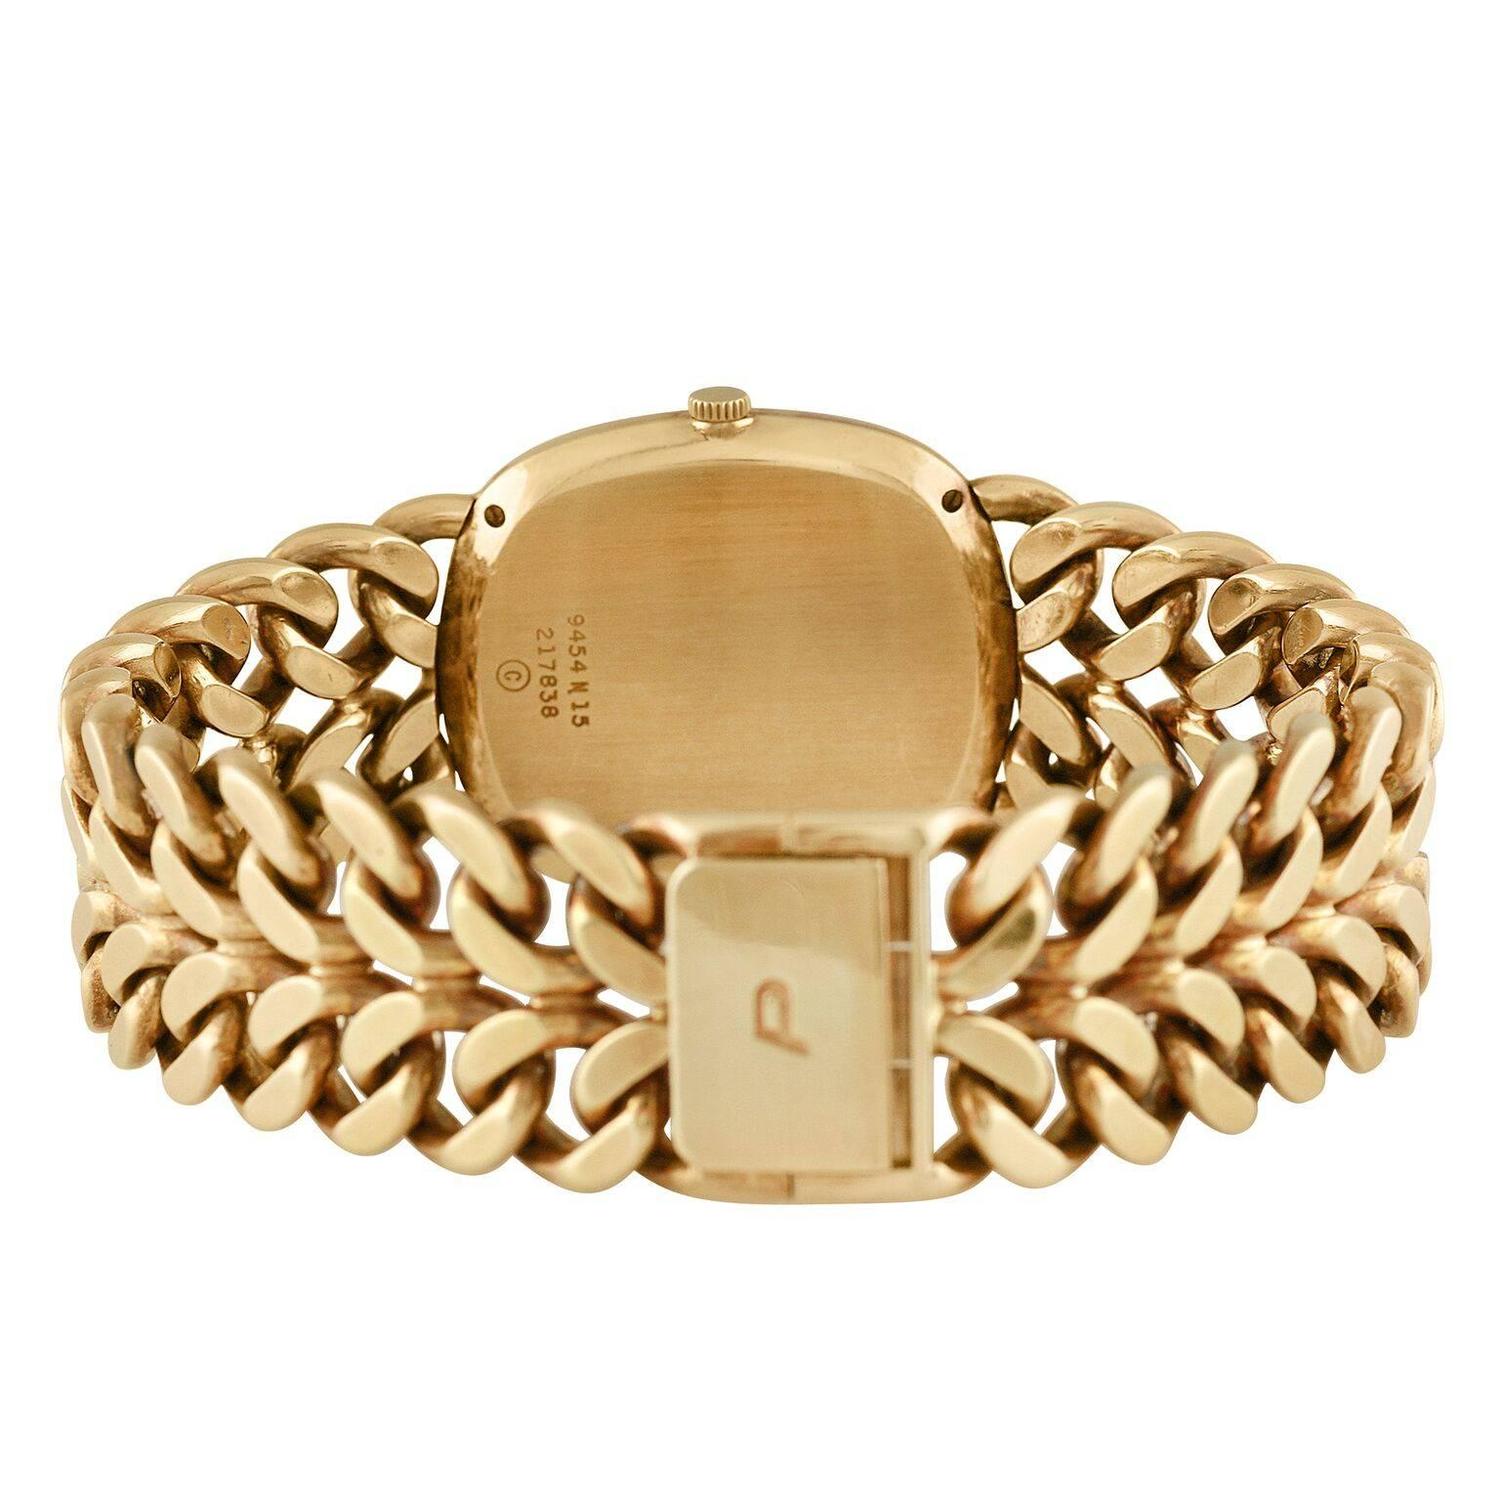 Piaget Yellow Gold Chain-Link Bracelet Wristwatch For Sale at 1stdibs